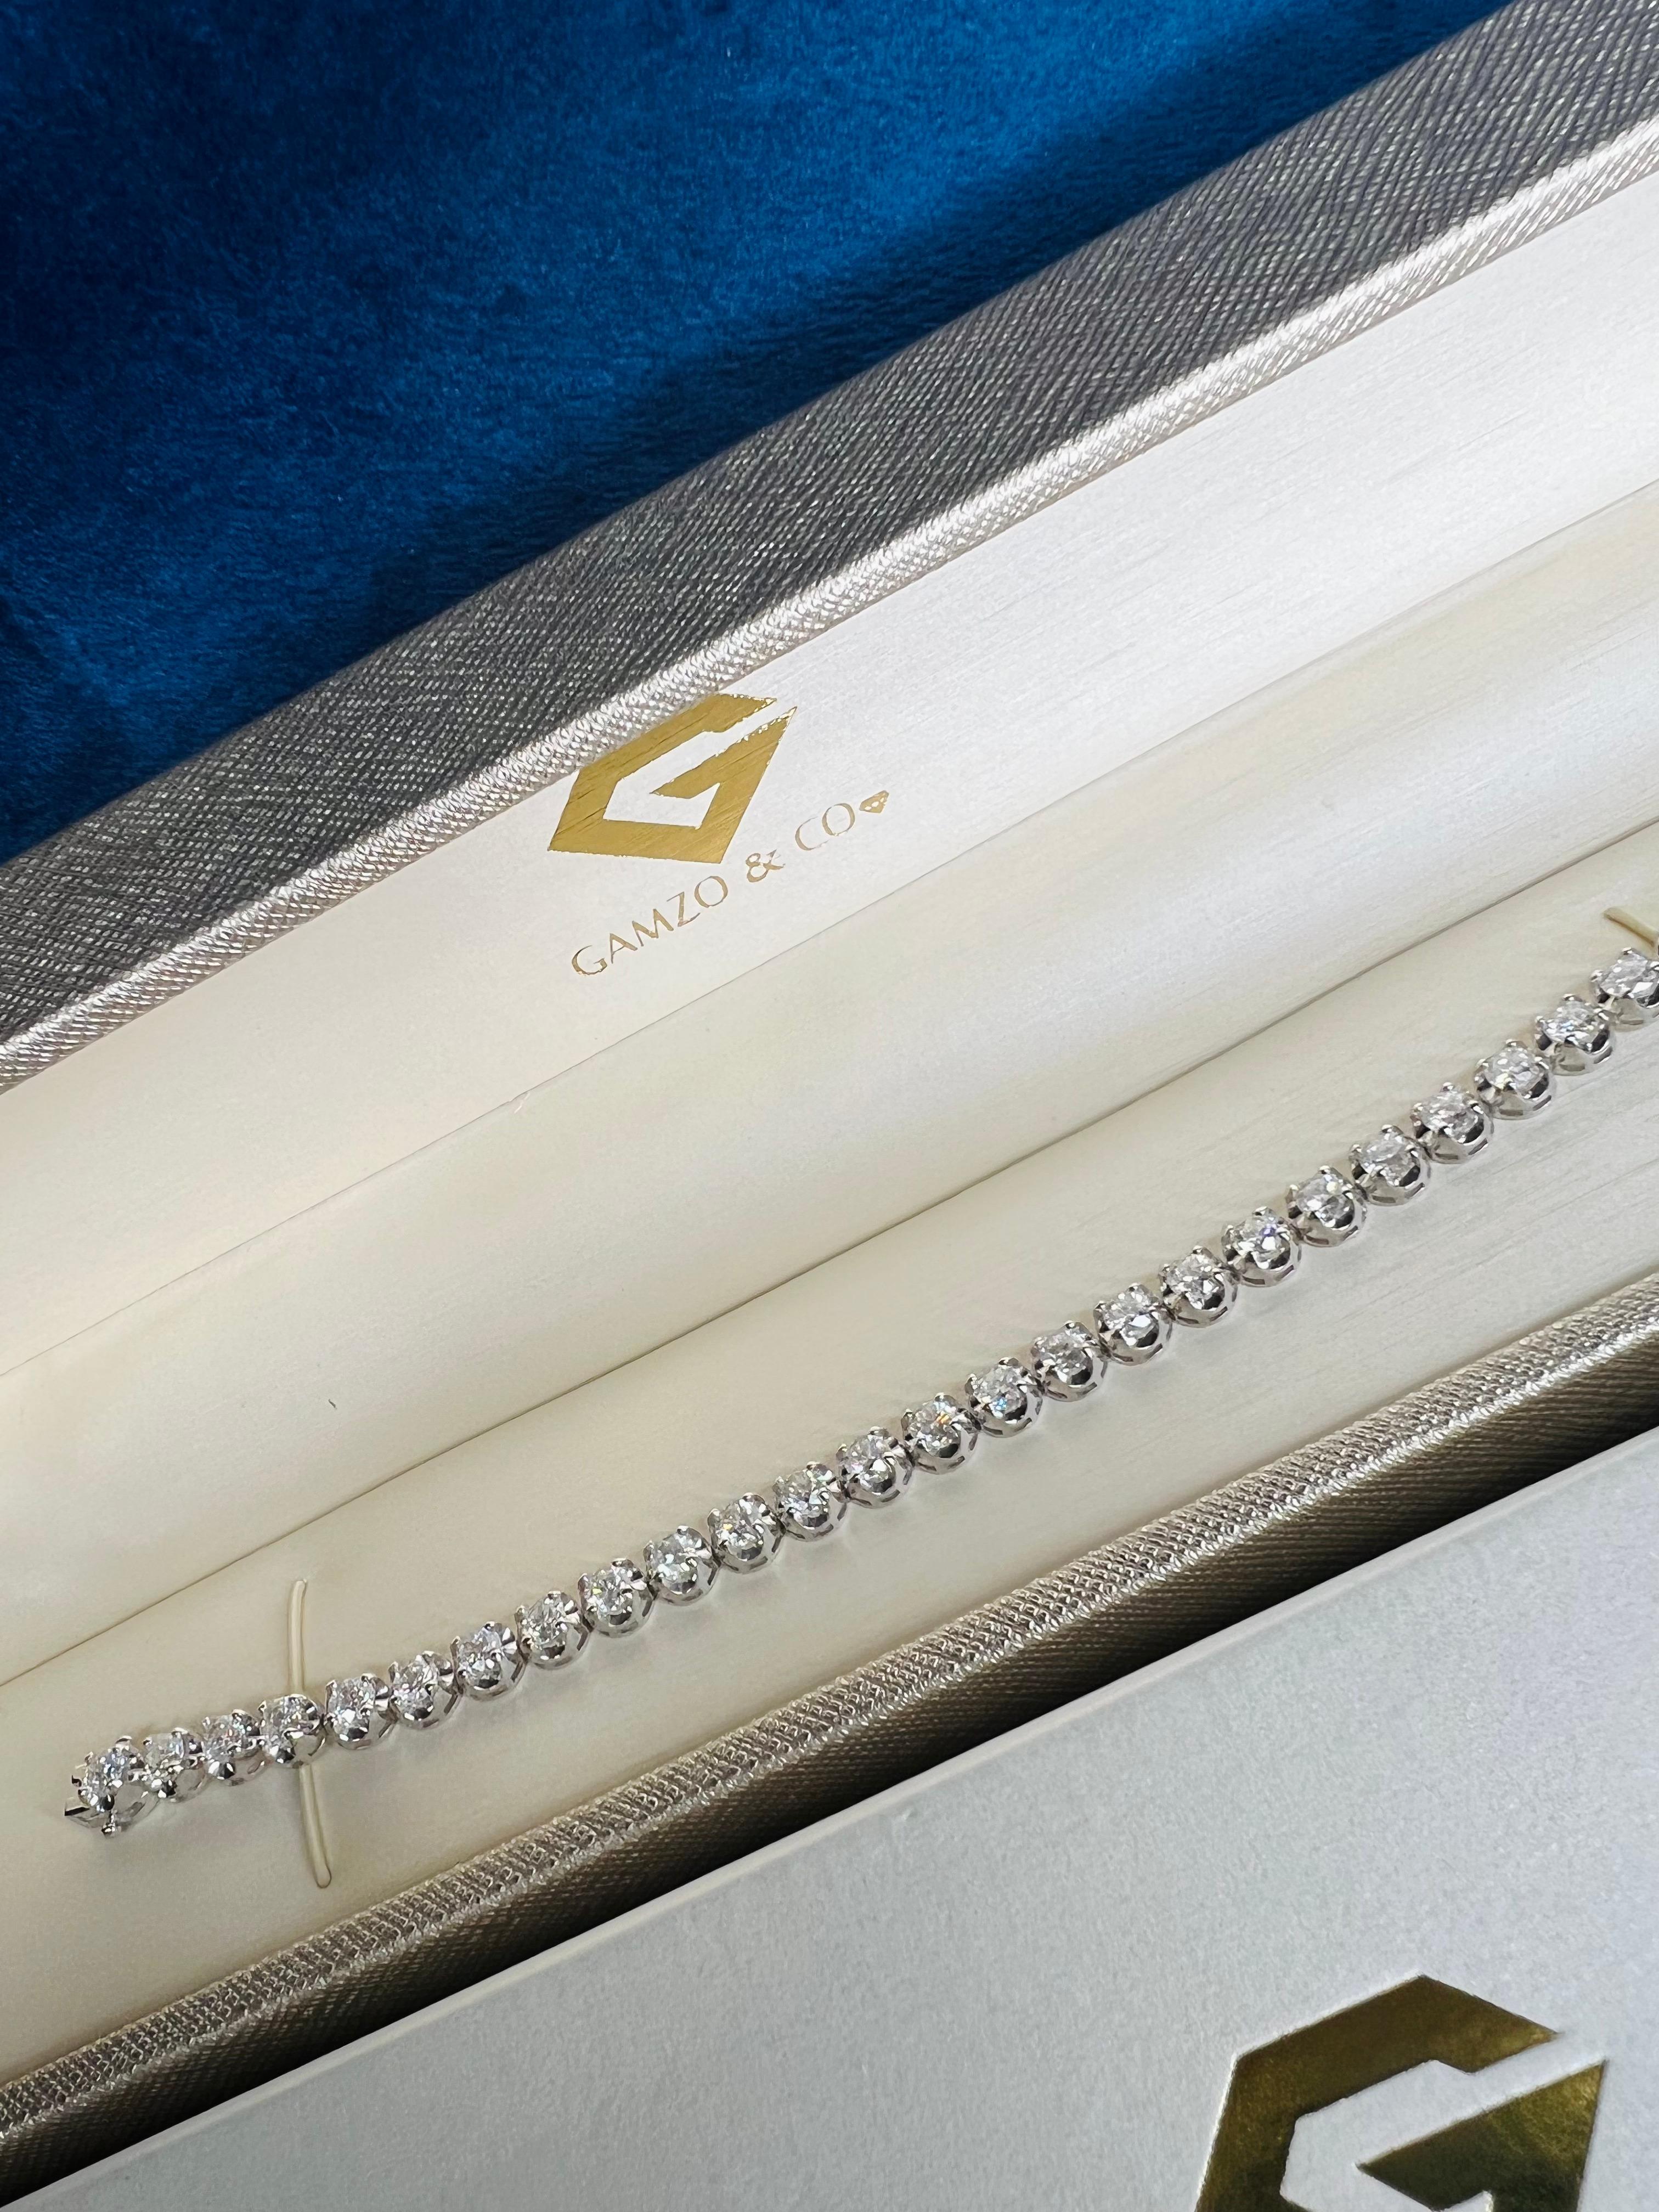 These beautiful round diamonds dance around your wrist as they absorb light and attention.
Metal: 14k Gold
Diamond Cut: Round
Diamond Total Carats: 7ct
Diamond Clarity: VS
Diamond Color: F
Color: White Gold
Bracelet Length: 7.5 Inches 
Included with